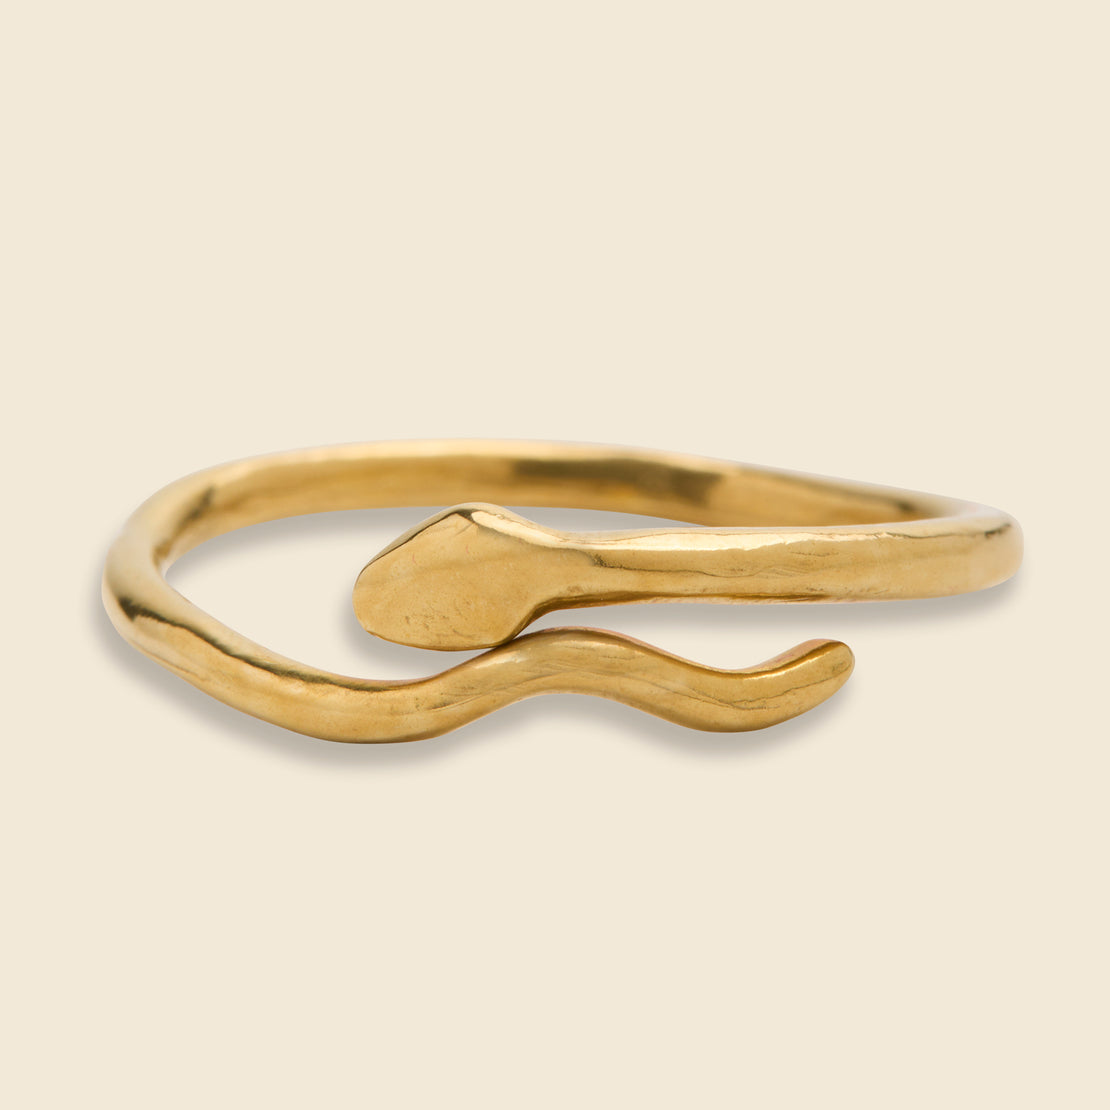 River Snake Ring - Bronze - Amanda Hunt - STAG Provisions - W - Accessories - Ring